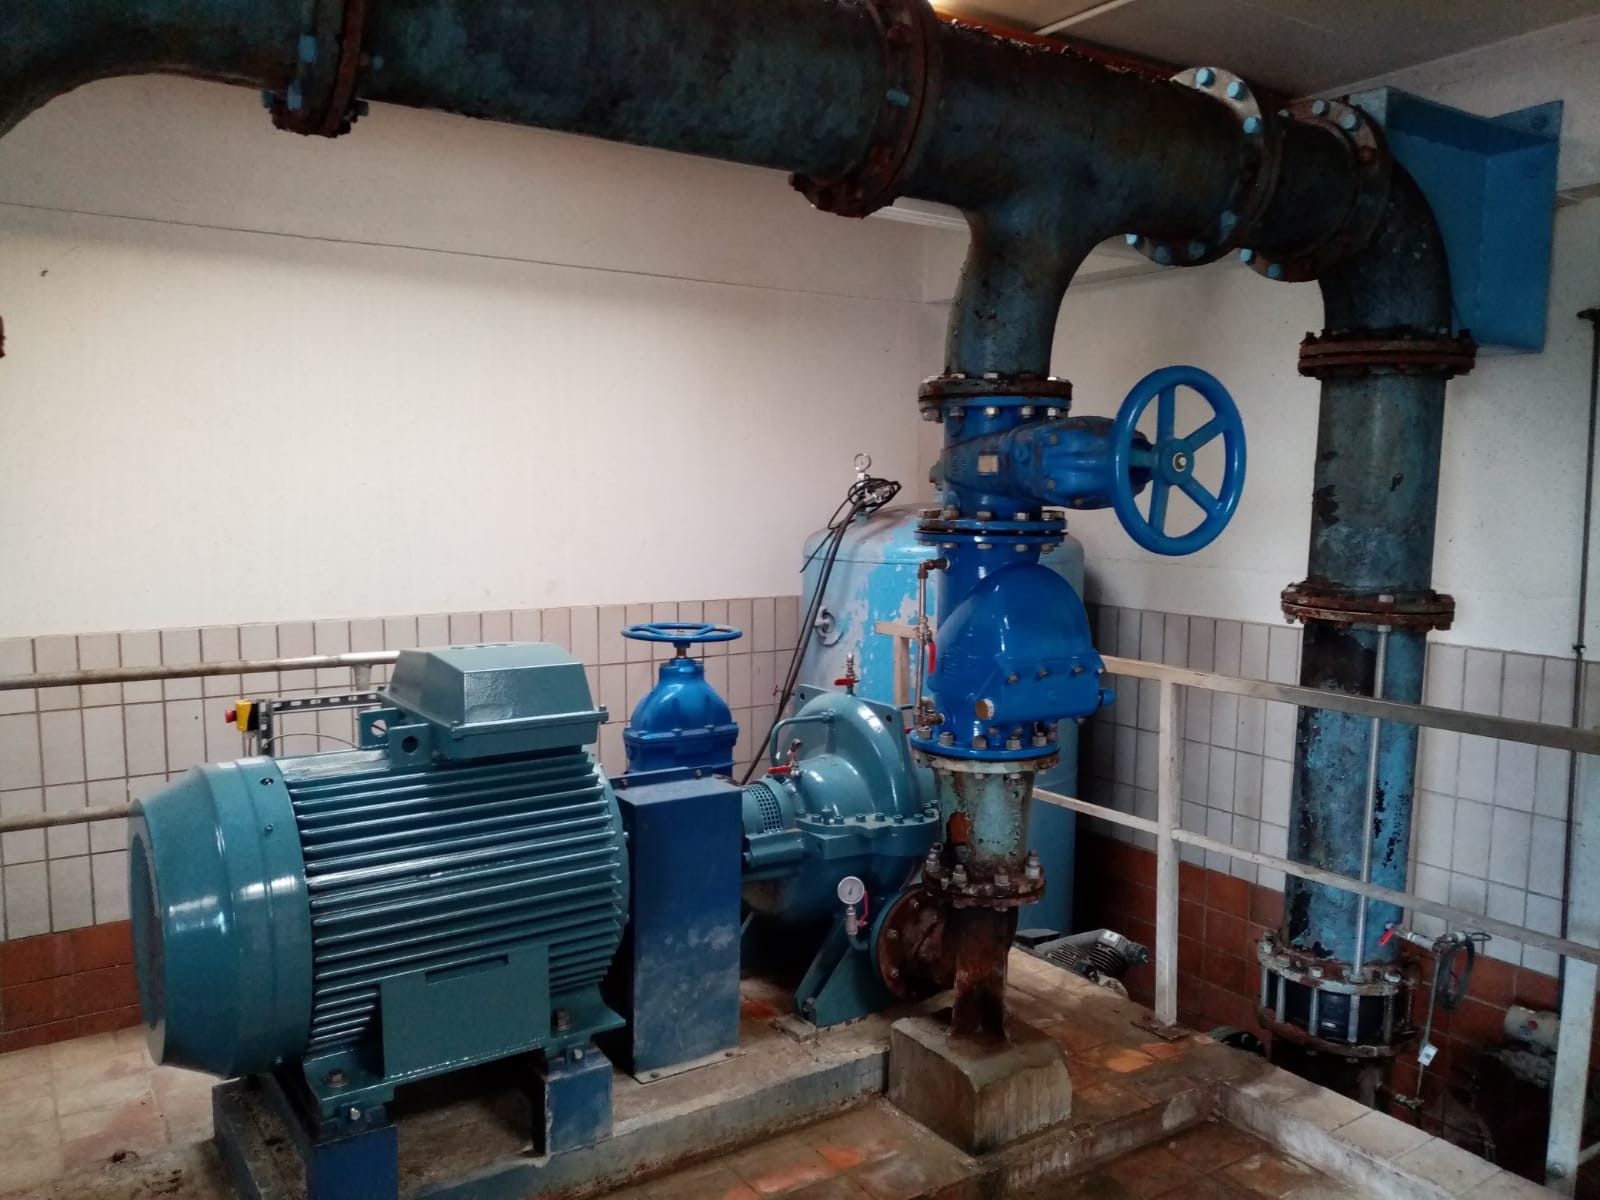 Pump with AVK pressure management device for cutting 90 percent of energy usage